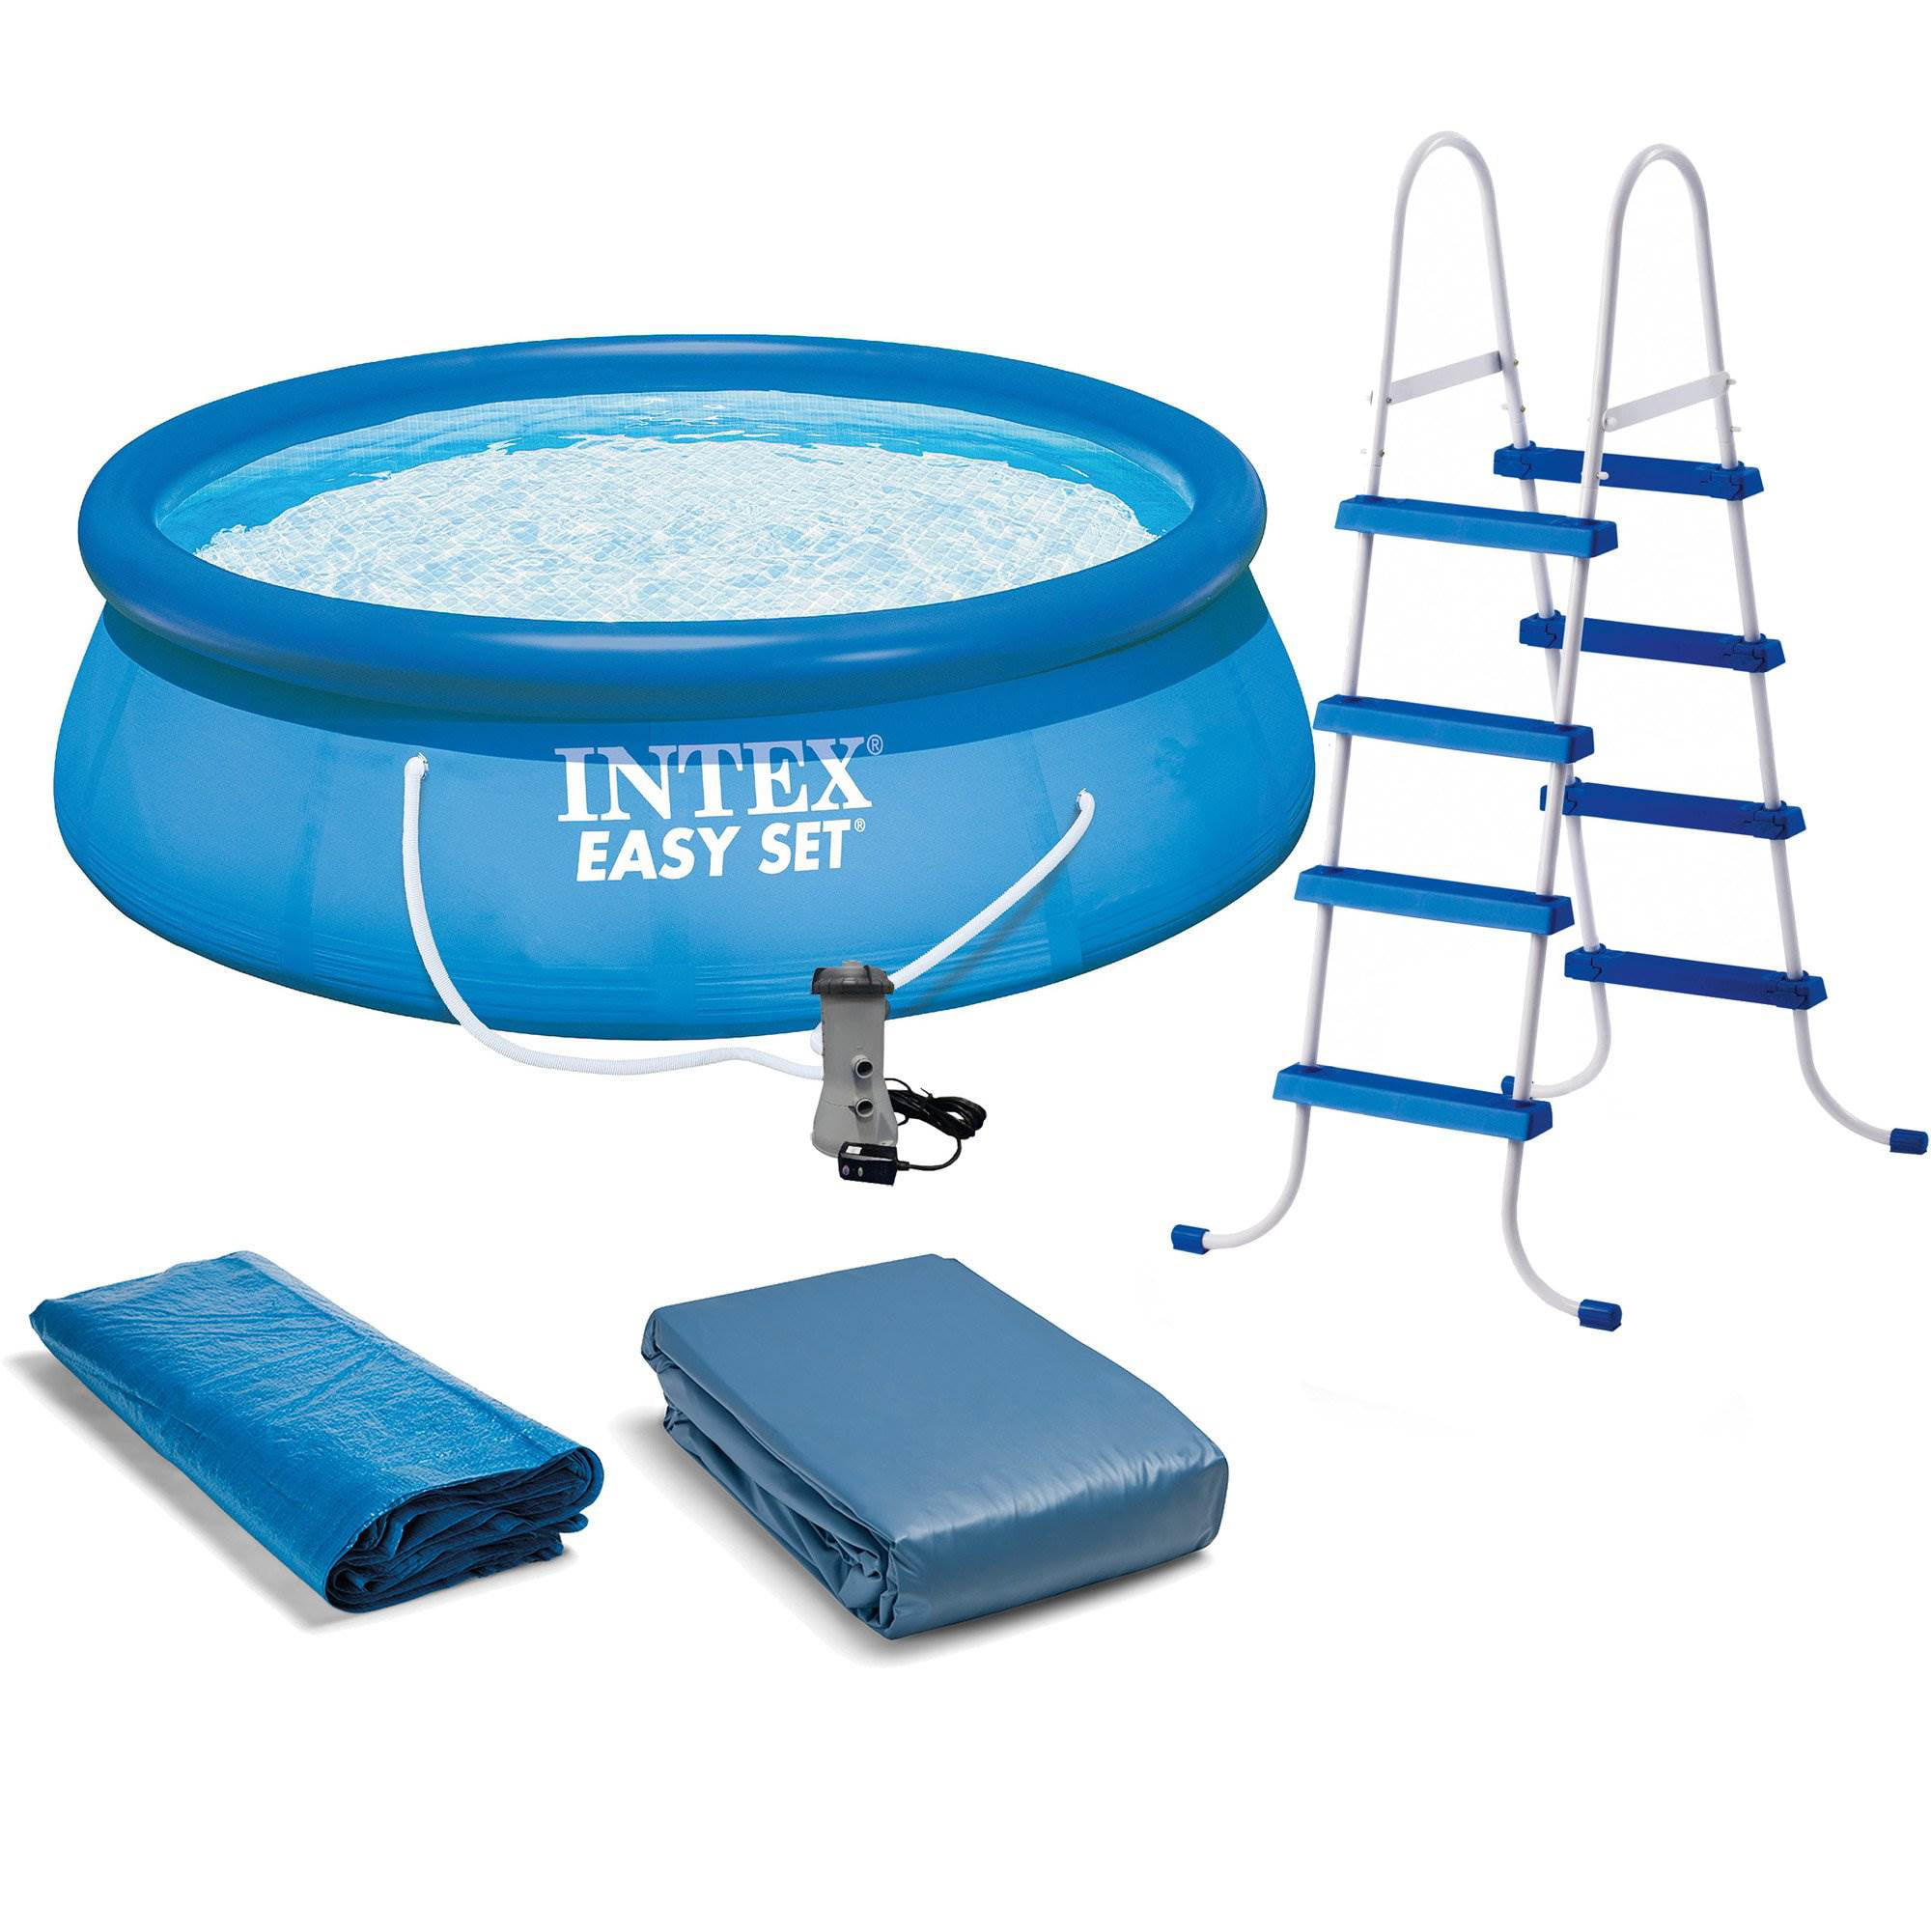 Intex 15ft X 48in Easy Set Pool Set with Filter Pump Ladder Ground Cloth & Pool Cover & Poolmaster 22211 Smart 4-Way Swimming Pool and Spa Water Chemistry Test Strips 1 Pack White and Yellow 